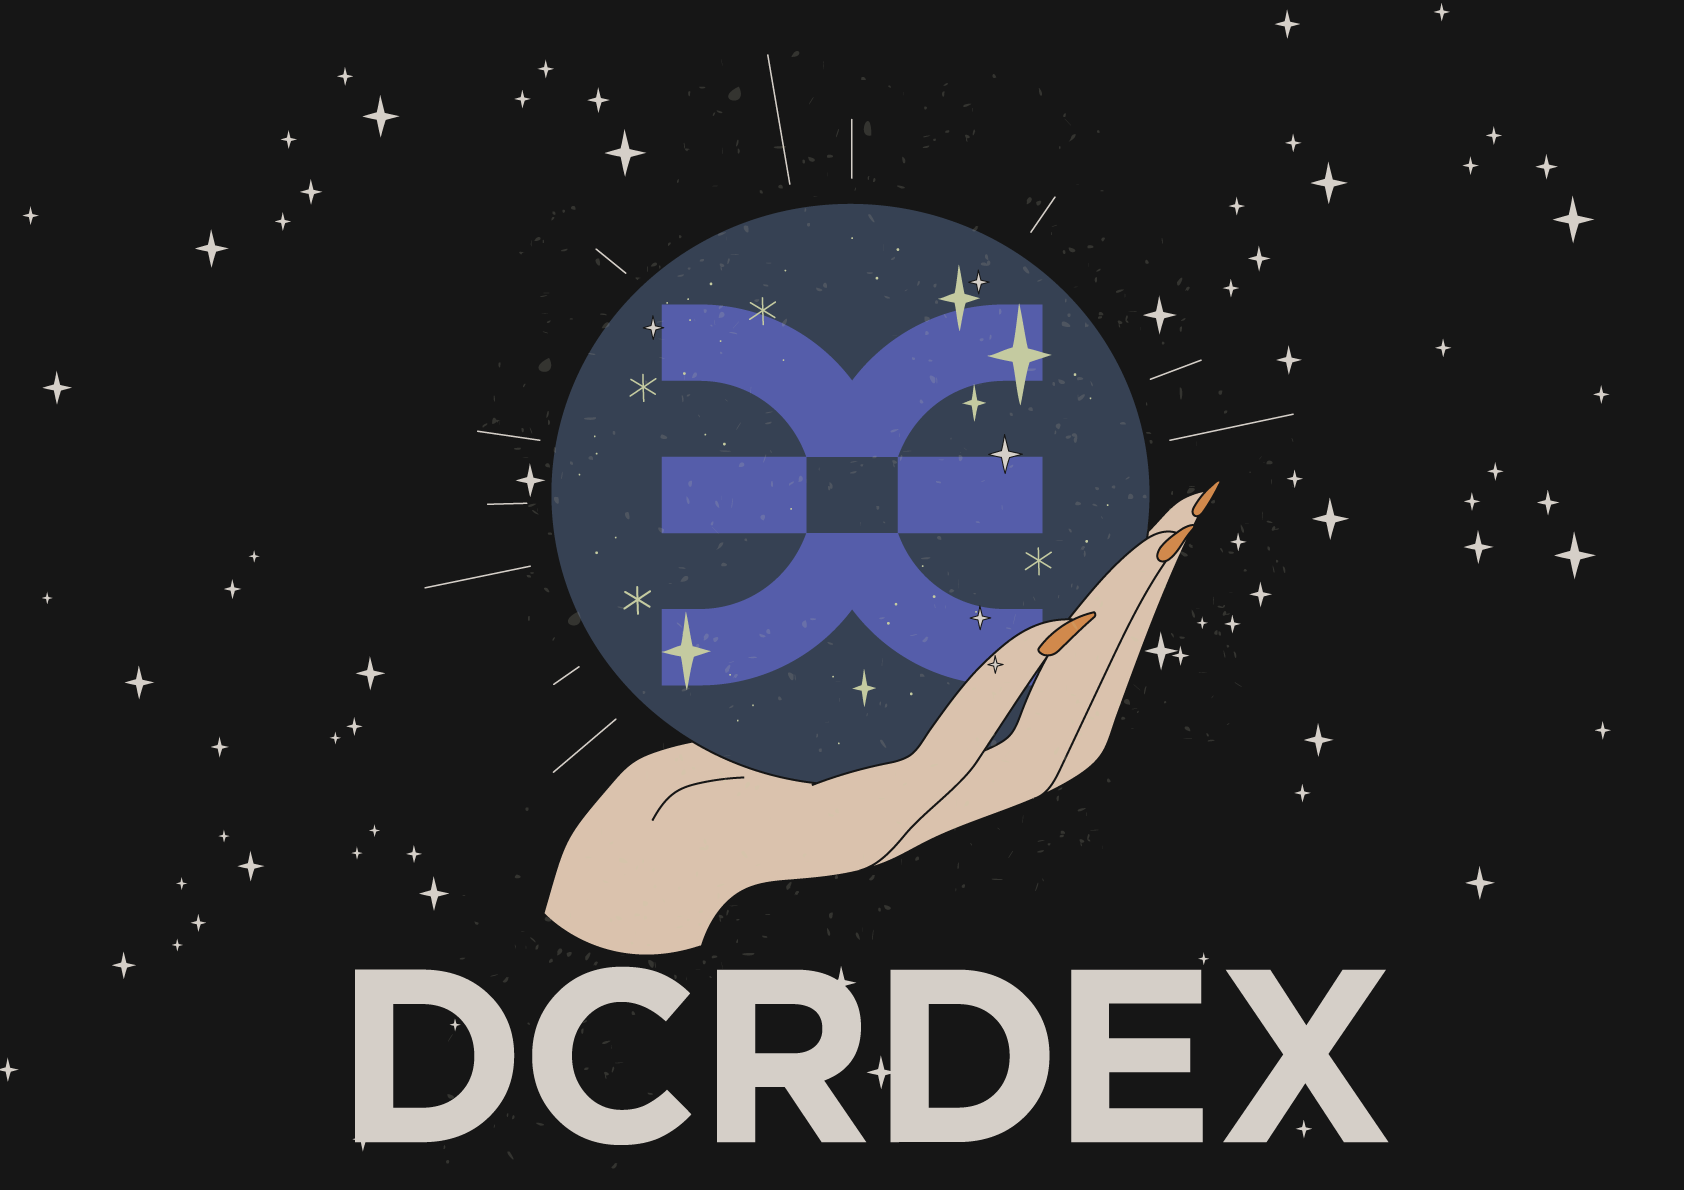 dcrdex-space.png